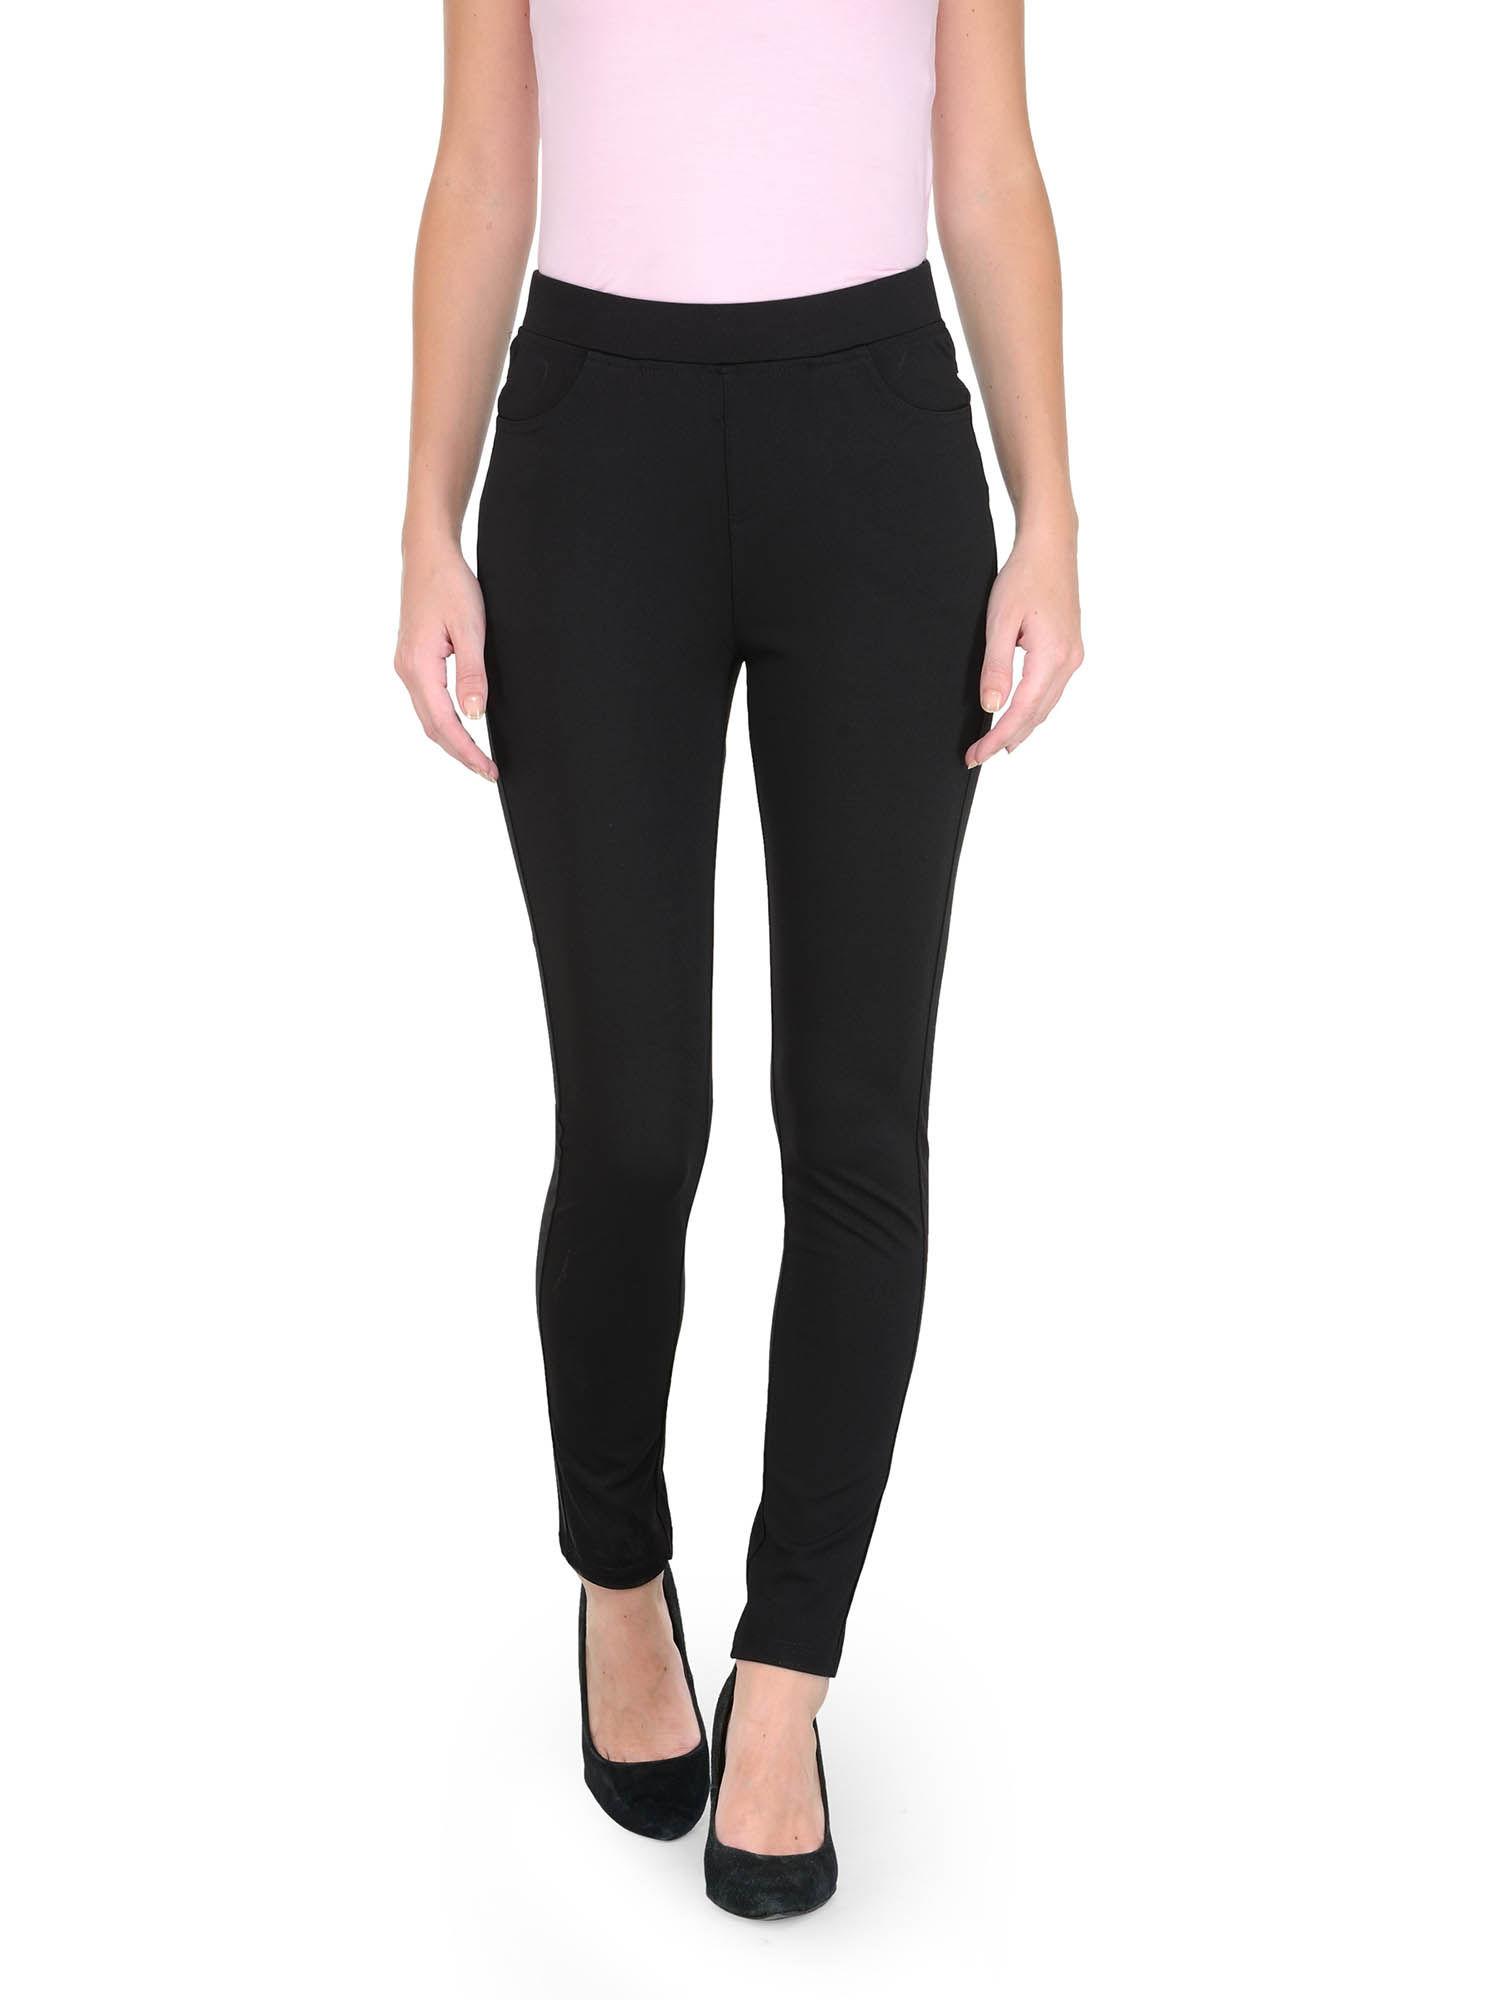 black casual rayon jeggings